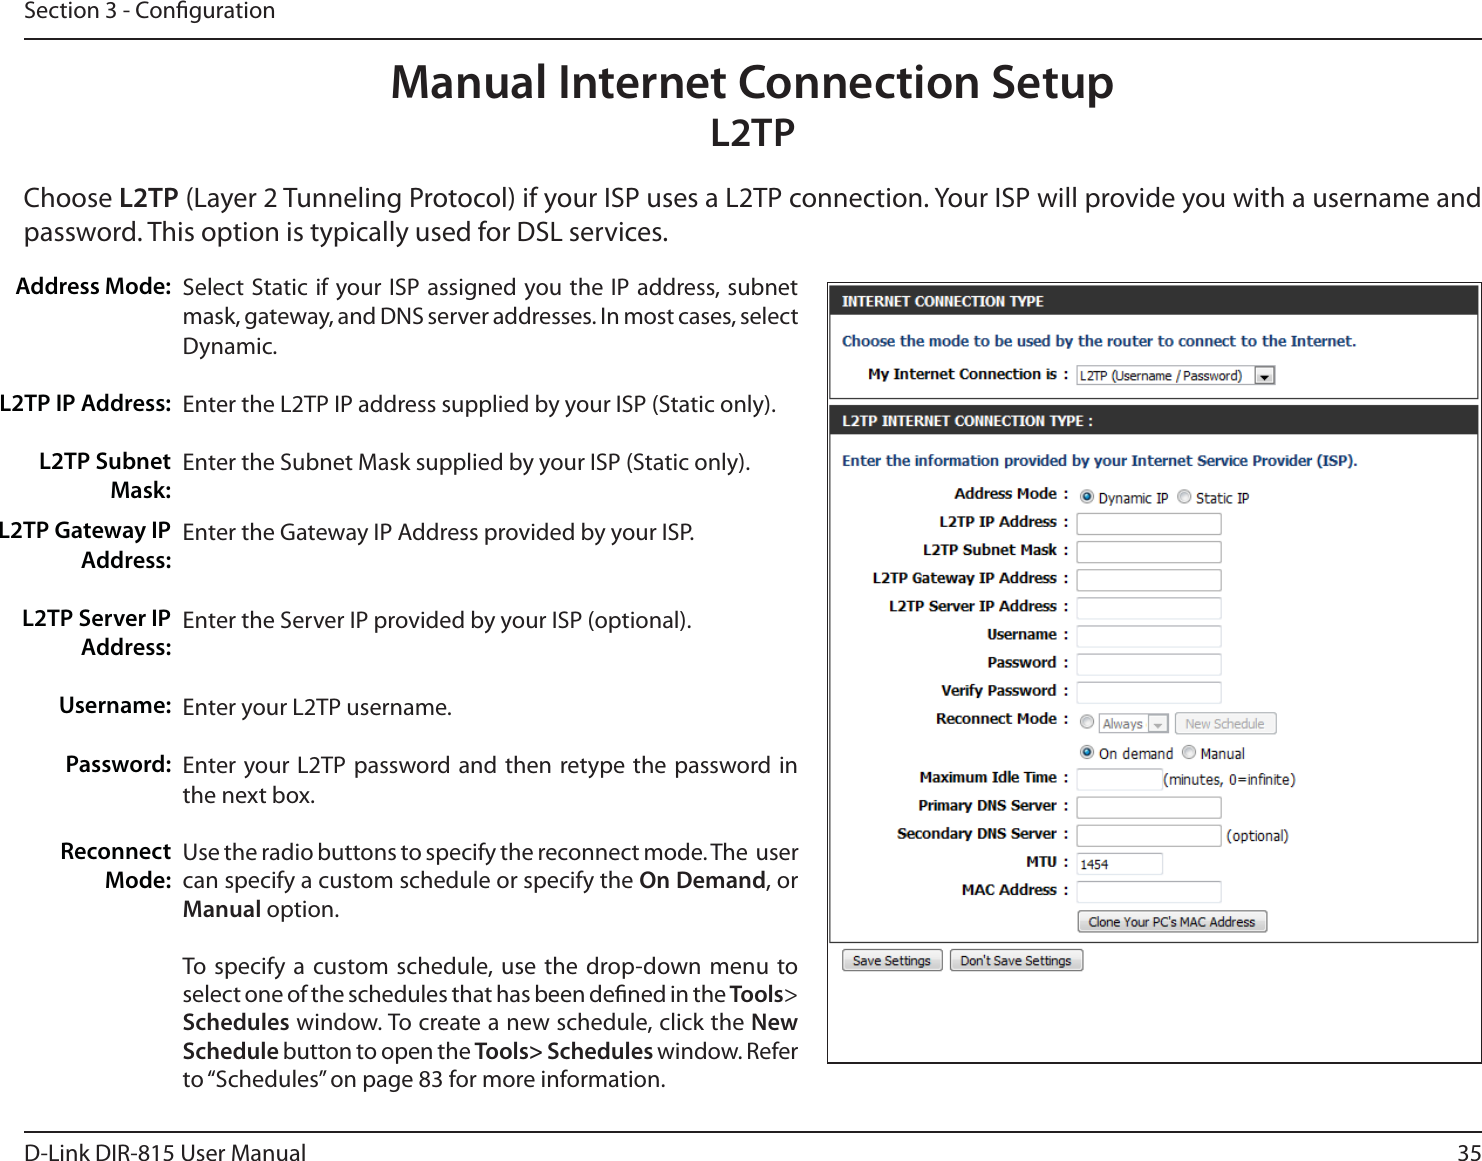 35D-Link DIR-815 User ManualSection 3 - CongurationSelect Static if your ISP assigned you the IP address, subnet mask, gateway, and DNS server addresses. In most cases, select Dynamic.Enter the L2TP IP address supplied by your ISP (Static only).Enter the Subnet Mask supplied by your ISP (Static only).Enter the Gateway IP Address provided by your ISP.Enter the Server IP provided by your ISP (optional).Enter your L2TP username.Enter your L2TP password and then retype the password in the next box.Use the radio buttons to specify the reconnect mode. The  user can specify a custom schedule or specify the On Demand, or Manual option.To specify a custom schedule, use the drop-down menu to select one of the schedules that has been dened in the Tools&gt; Schedules window. To create a new schedule, click the New Schedule button to open the Tools&gt; Schedules window. Refer to “Schedules” on page 83 for more information.Address Mode:-51*1&quot;EESFTT-514VCOFUMask:Manual Internet Connection Setup-51Choose -51-BZFS5VOOFMJOH1SPUPDPMJGZPVS*41VTFTB-51DPOOFDUJPO:PVS*41XJMMQSPWJEFZPVXJUIBVTFSOBNFBOEpassword. This option is typically used for DSL services. -51(BUFXBZ*1Address:-514FSWFS*1Address:Username:Password:Reconnect Mode: